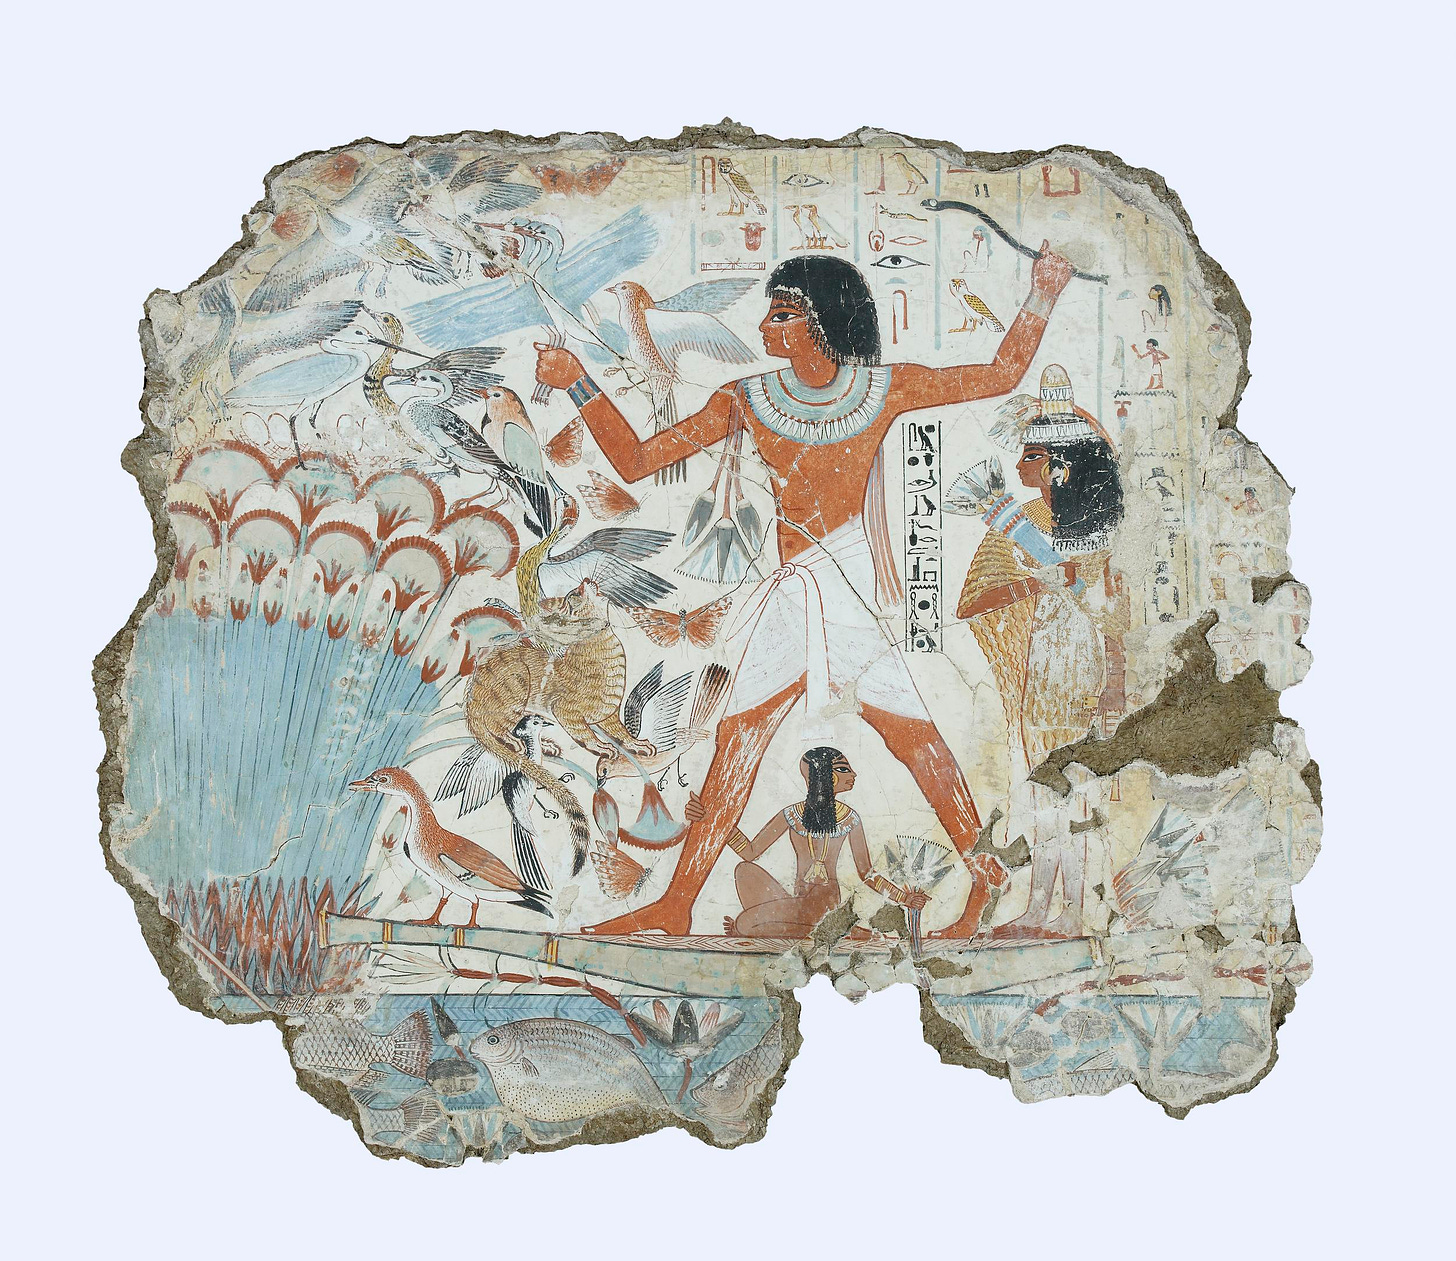 Nebamun fowling in the marshes, Tomb-chapel of Nebamun, c. 1350 B.C.E., 18th Dynasty, paint on plaster, 83 x 98 cm, Thebes © Trustees of the British Museum